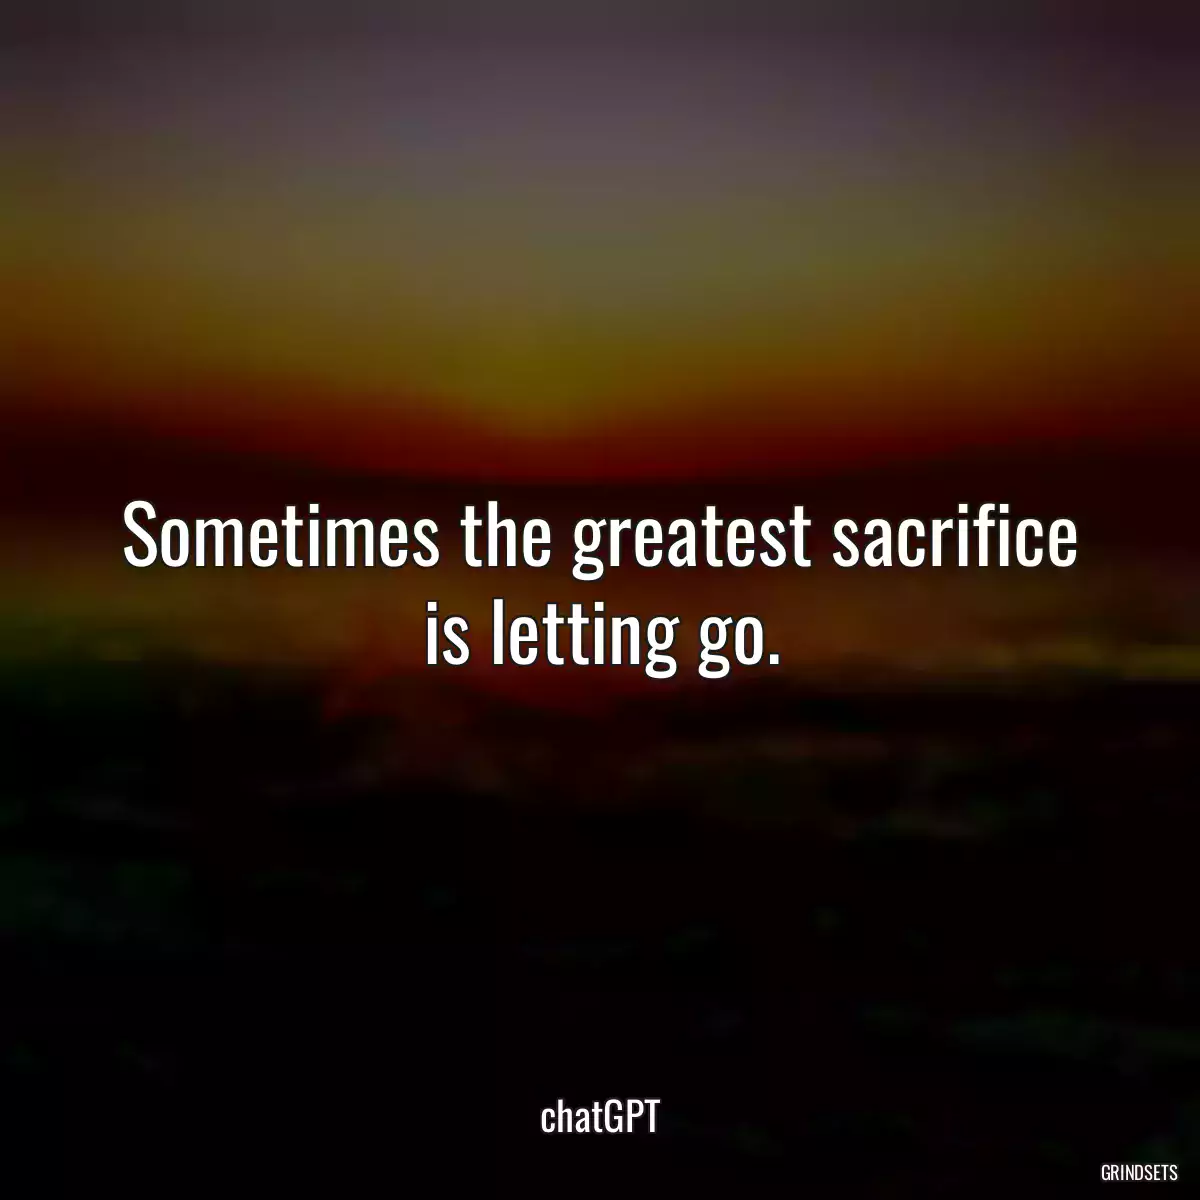 Sometimes the greatest sacrifice is letting go.